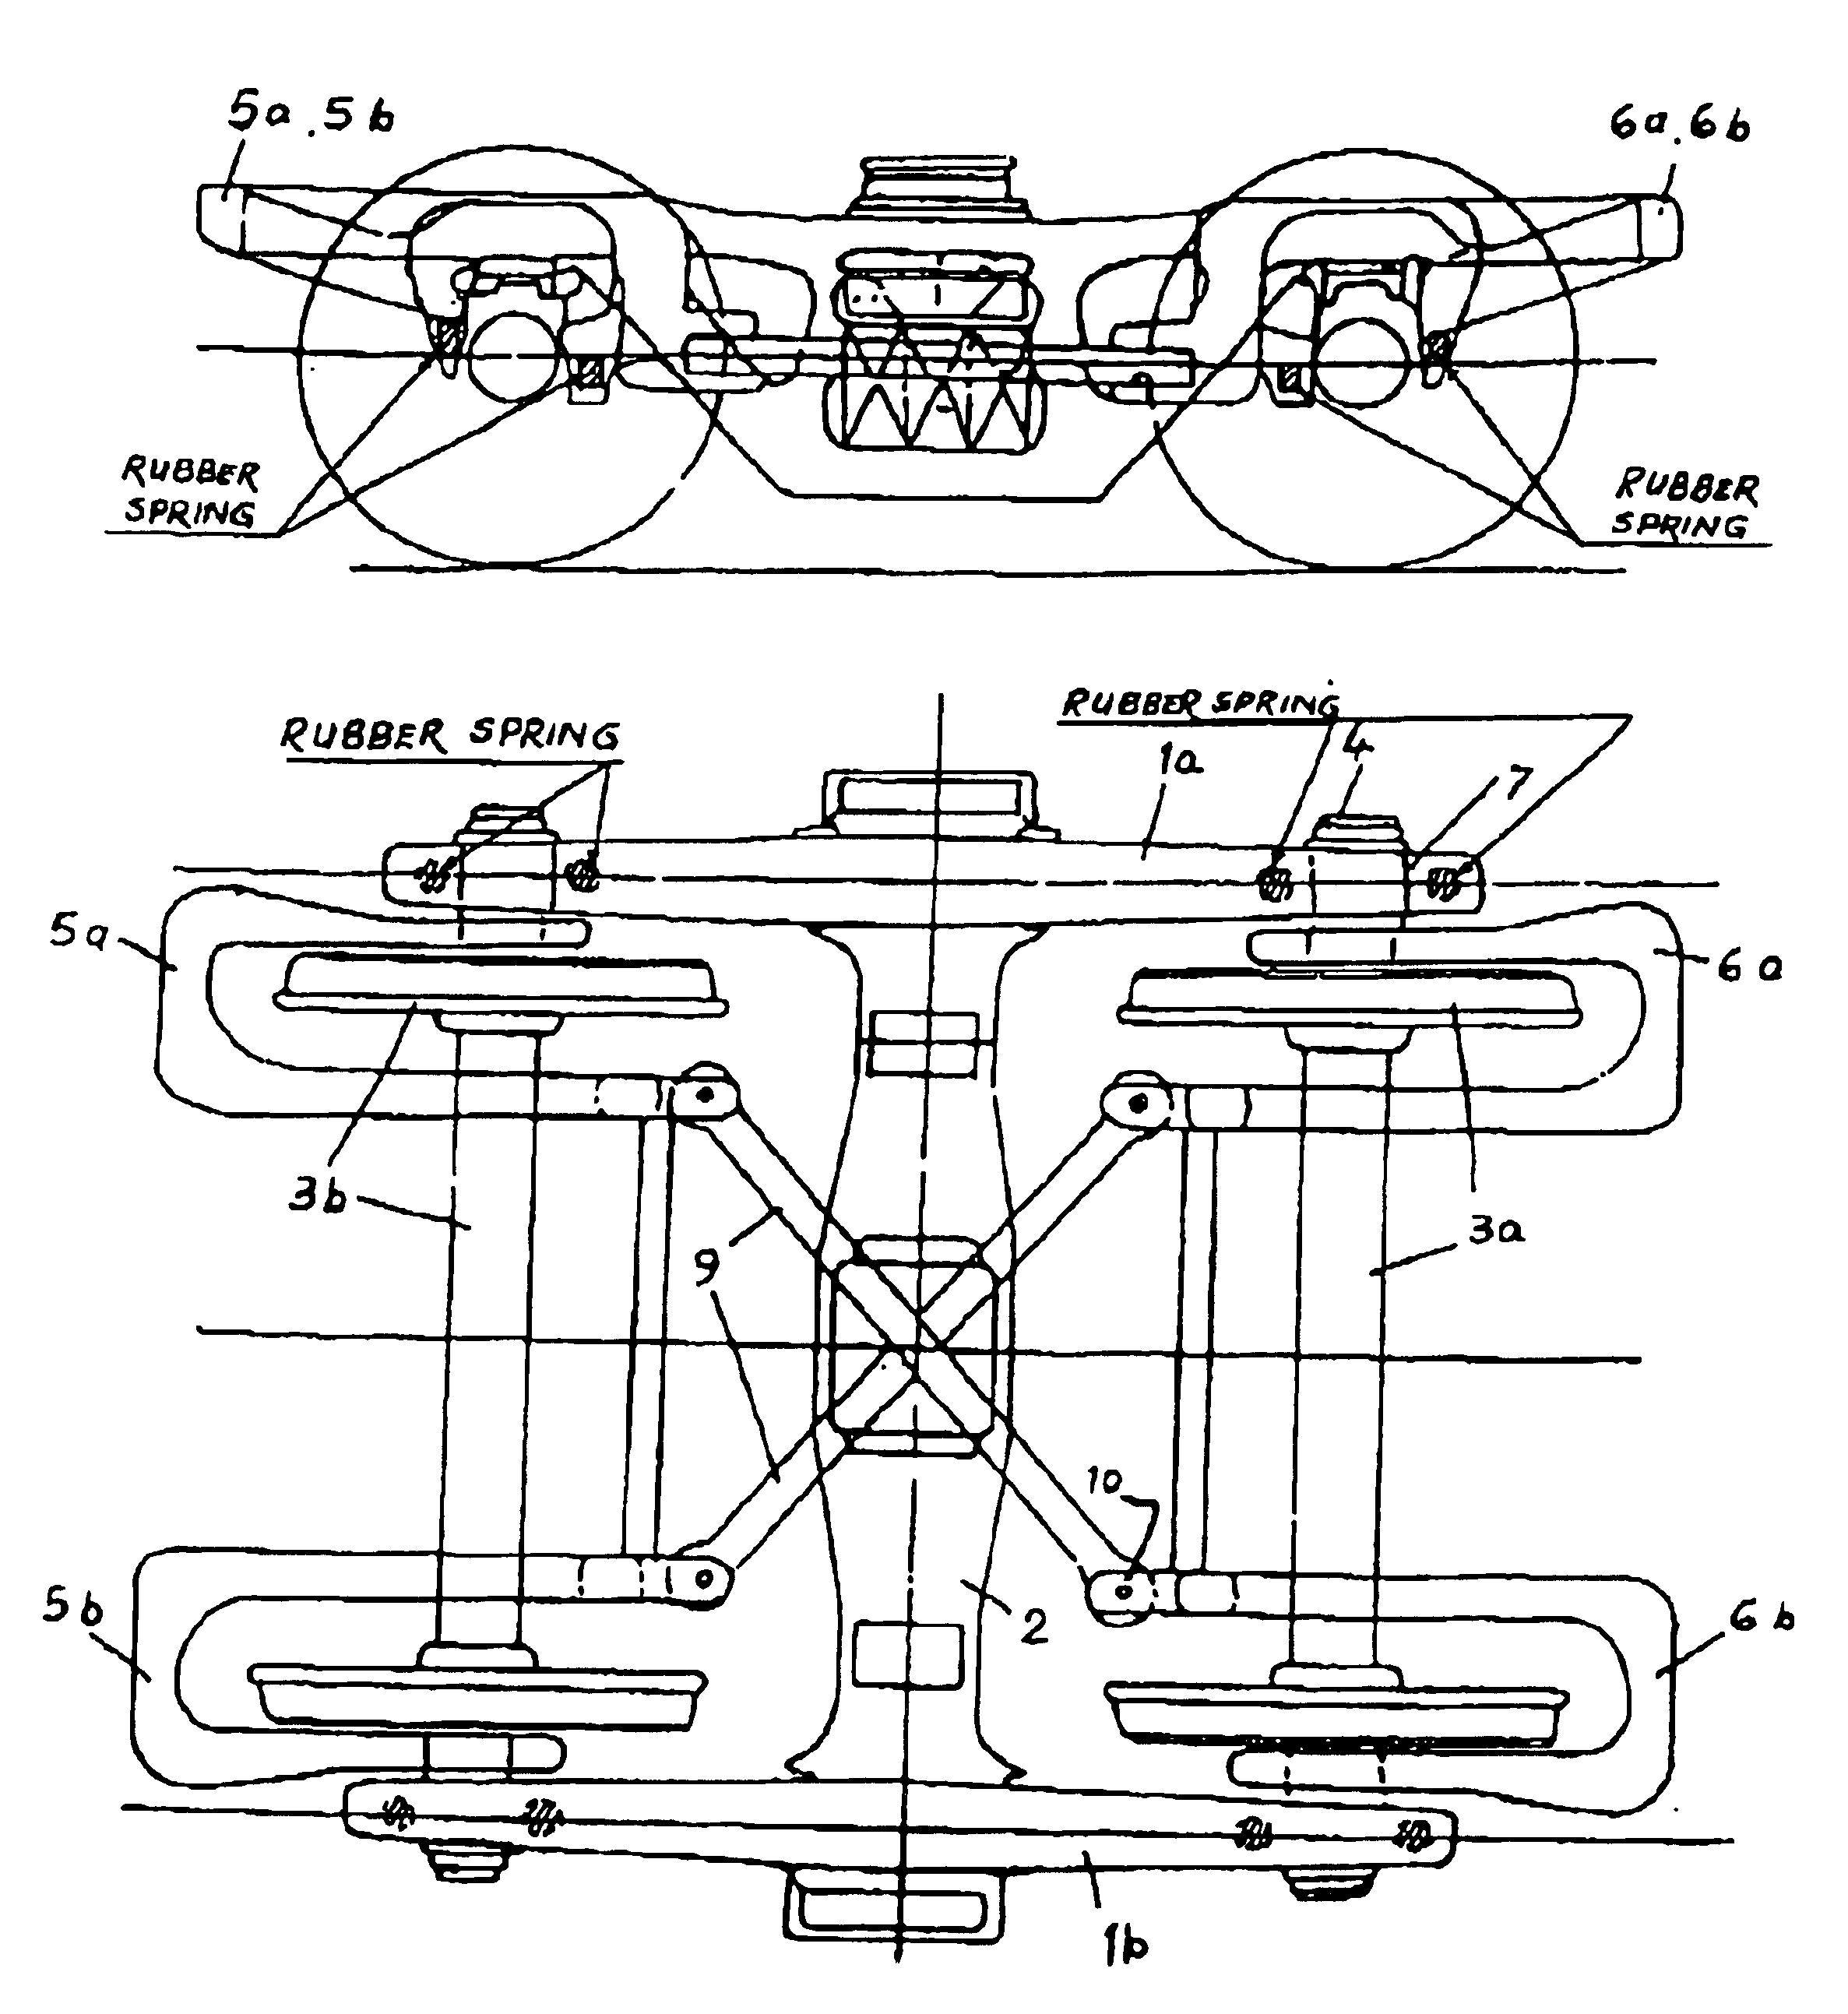 Control arm system for steering bogie wheels and axles